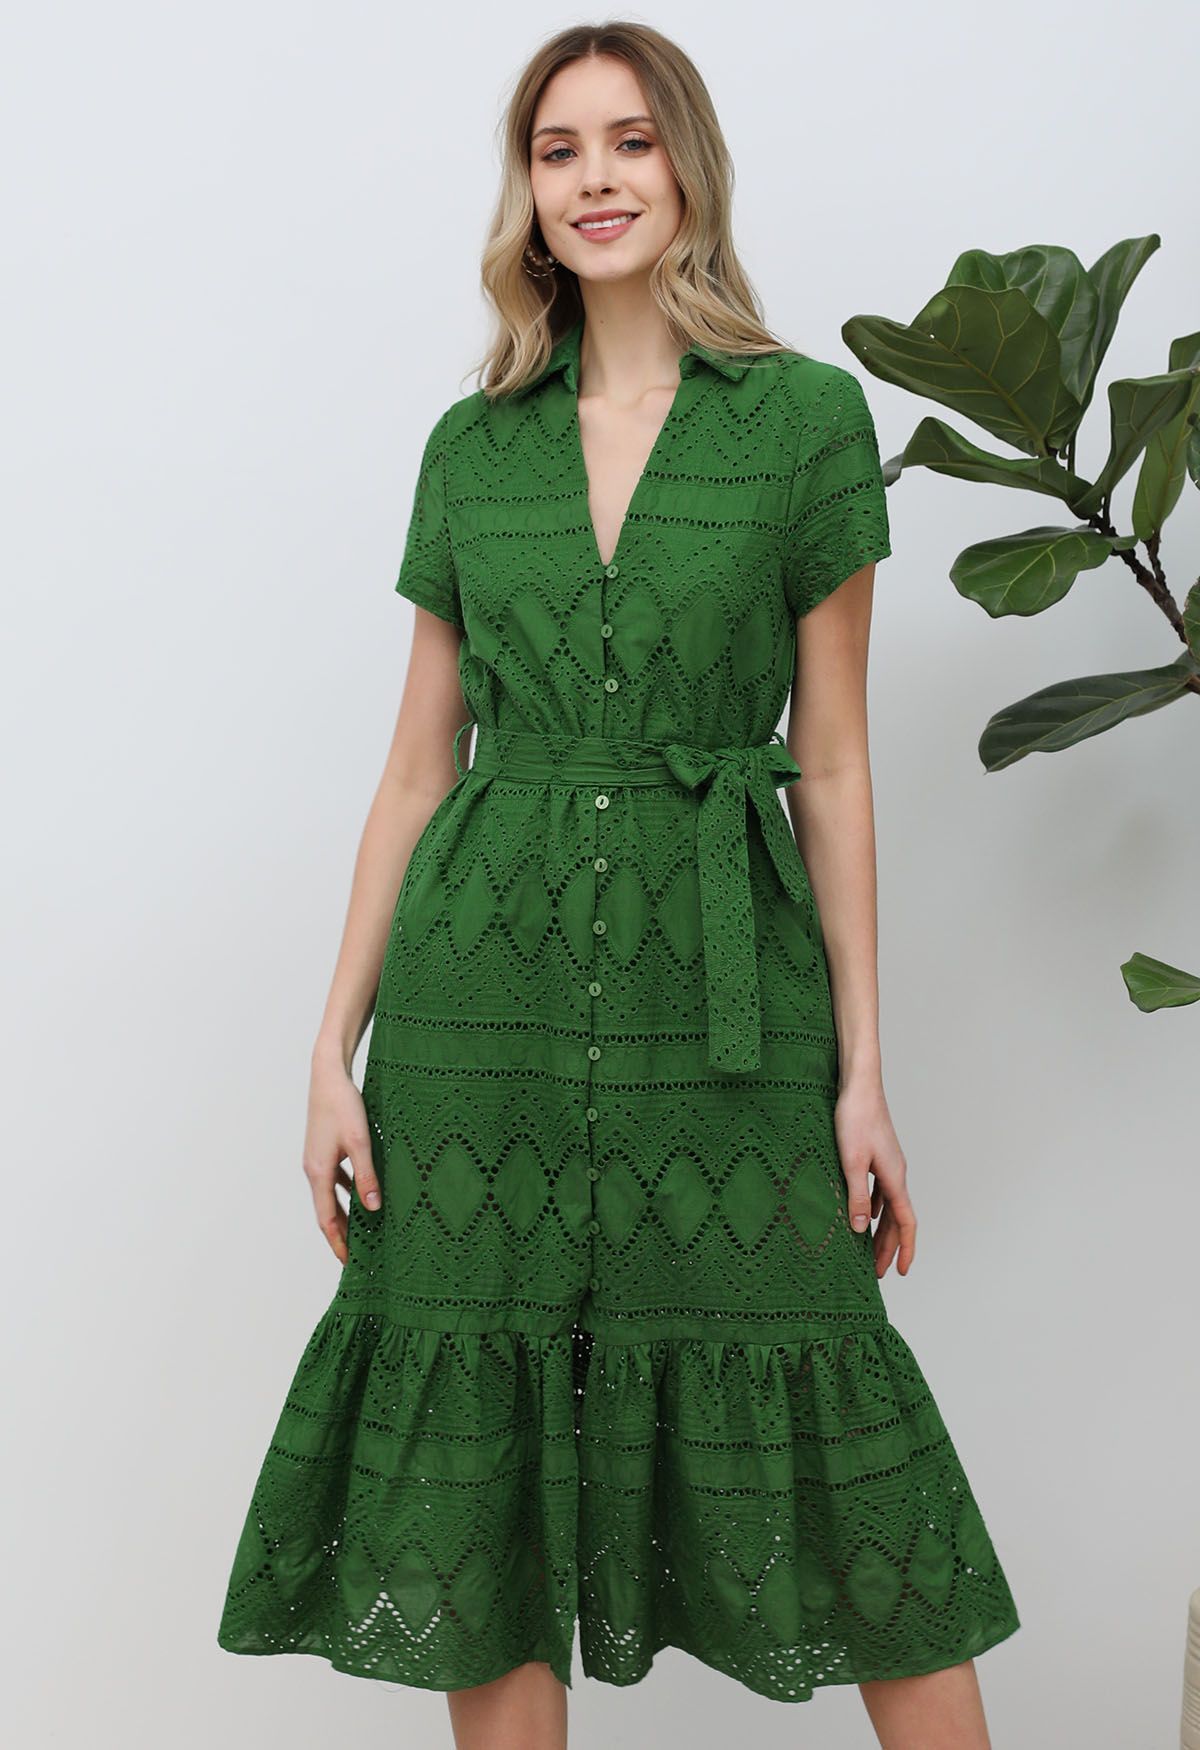 Greenery in Spring Embroidered Eyelet Frilling Dress | Chicwish